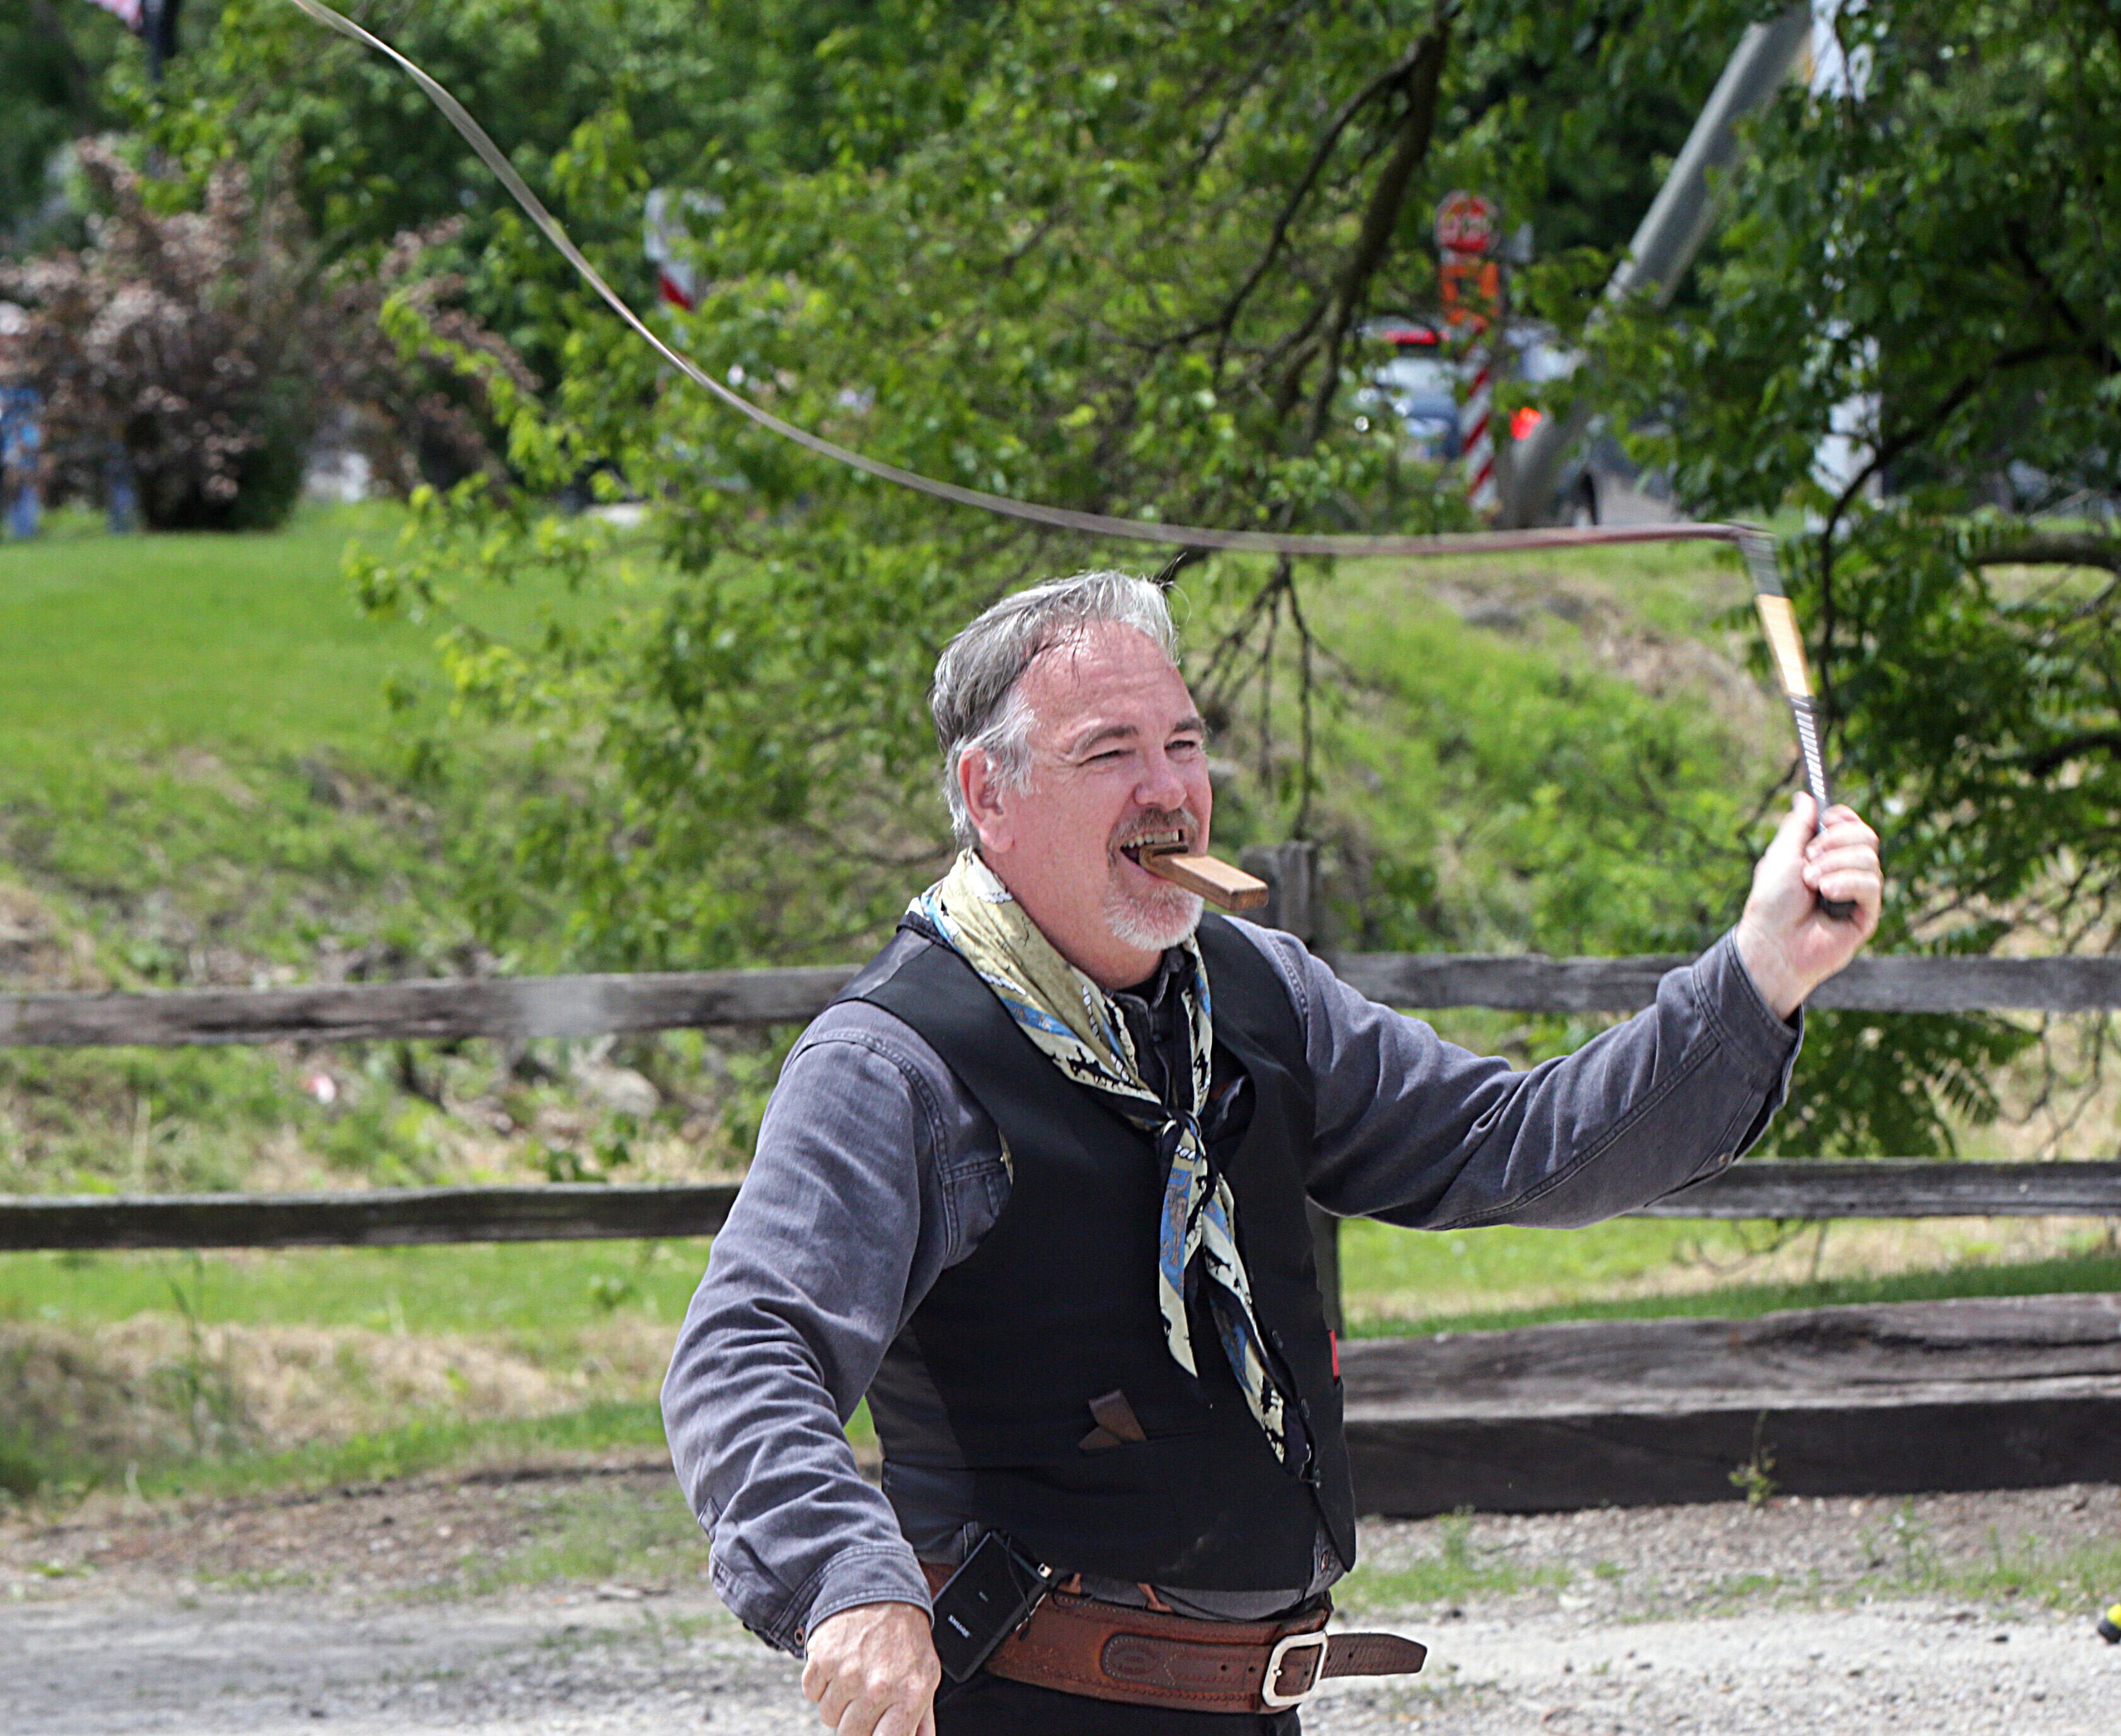 Chris Camp, "The Whip Guy" uses whips while playing a harmonica at the Wild Bill Days event at the La Salle County Historical Society in Utica.